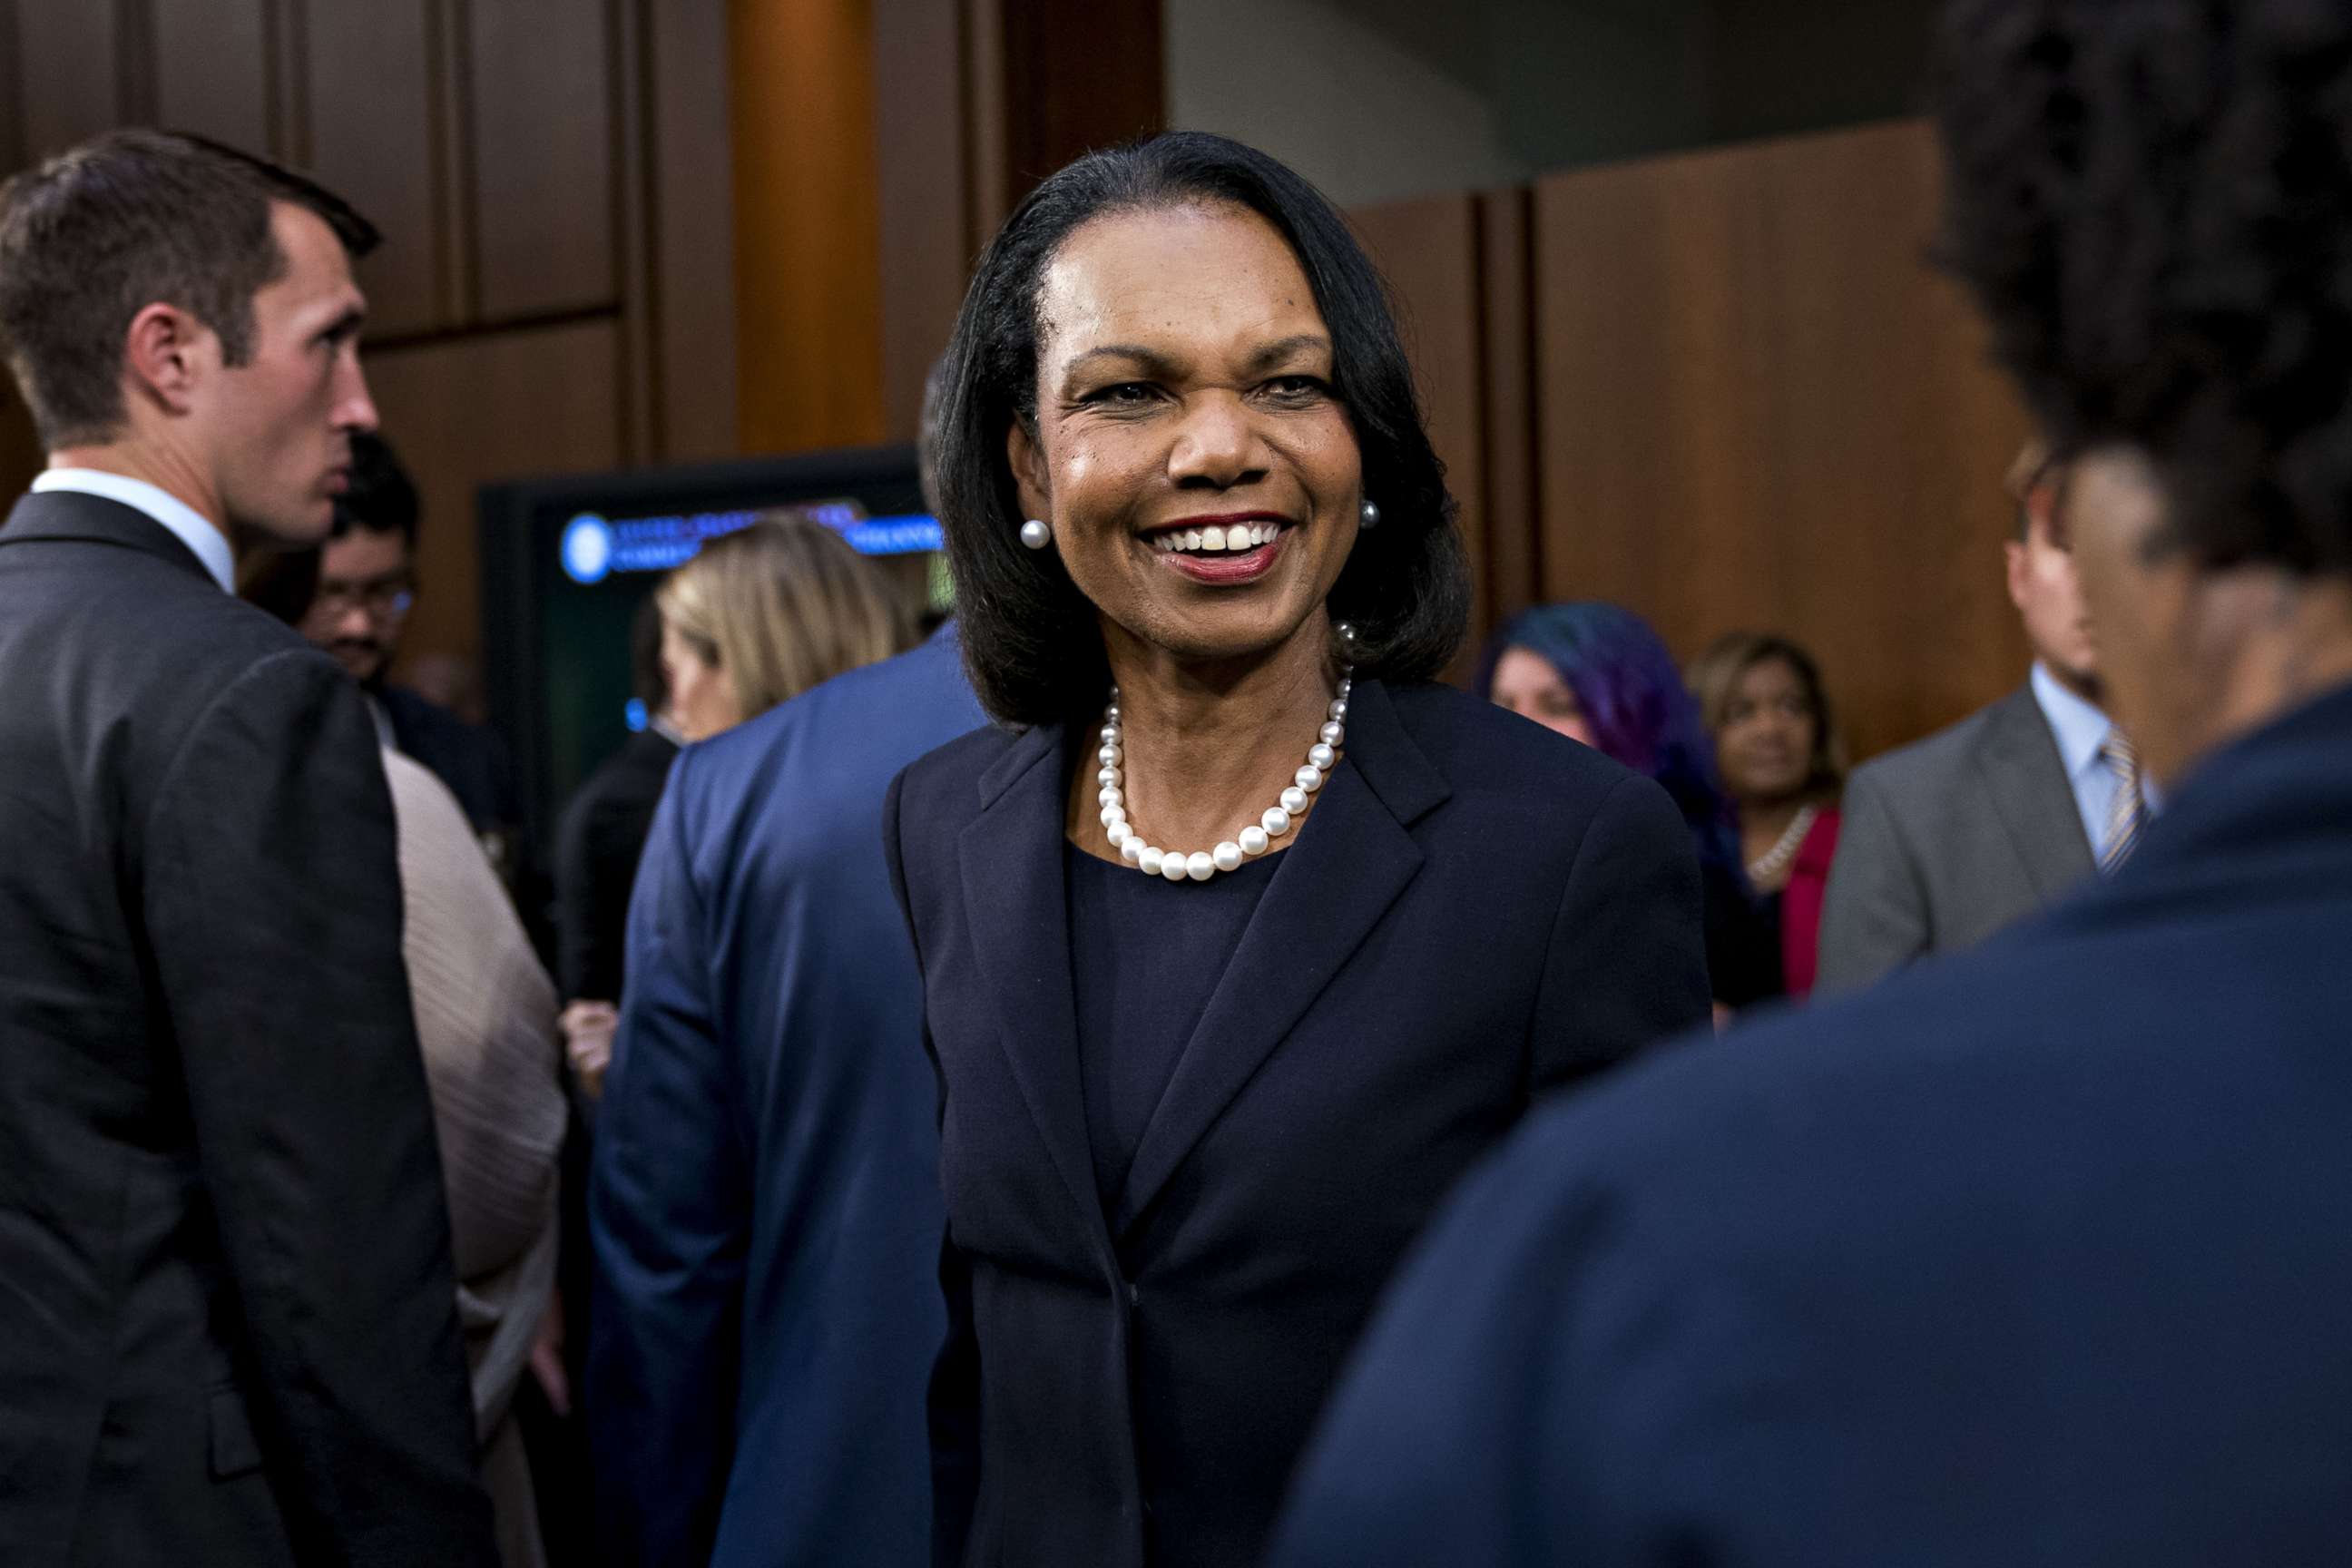 Condoleezza Rice proudly supports Browns in campaign for NFL